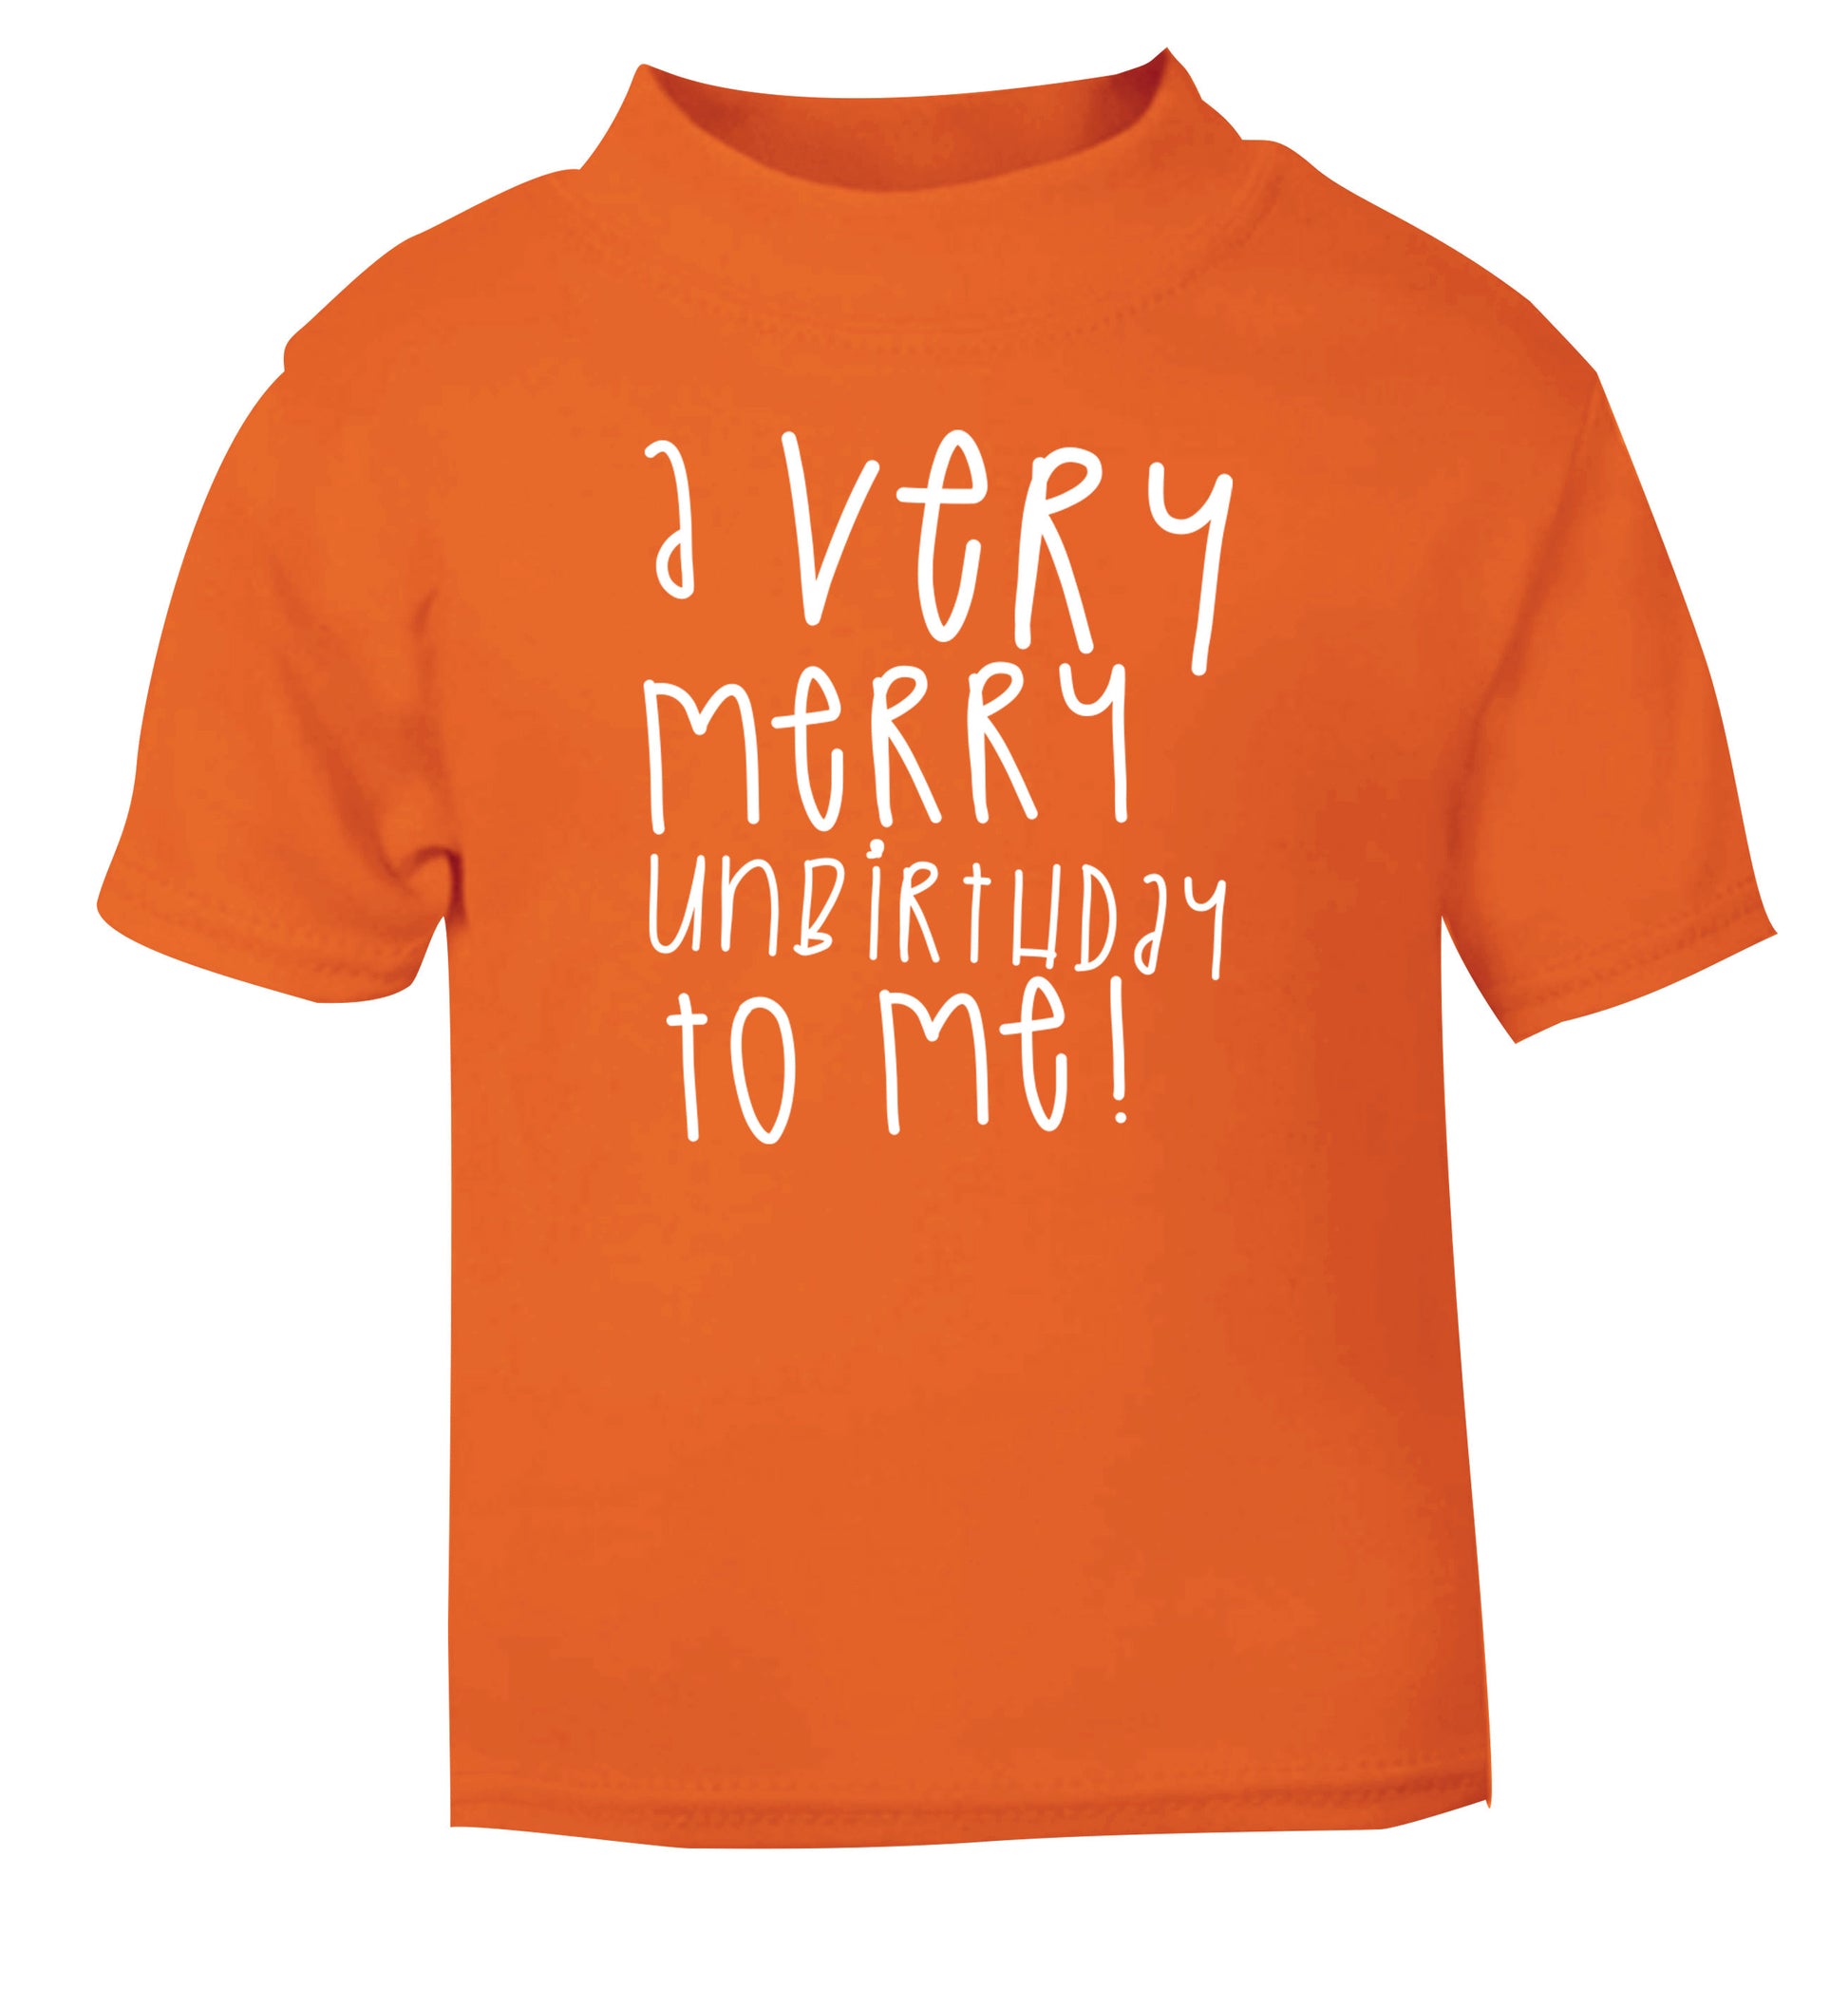 A very merry unbirthday to me! orange Baby Toddler Tshirt 2 Years